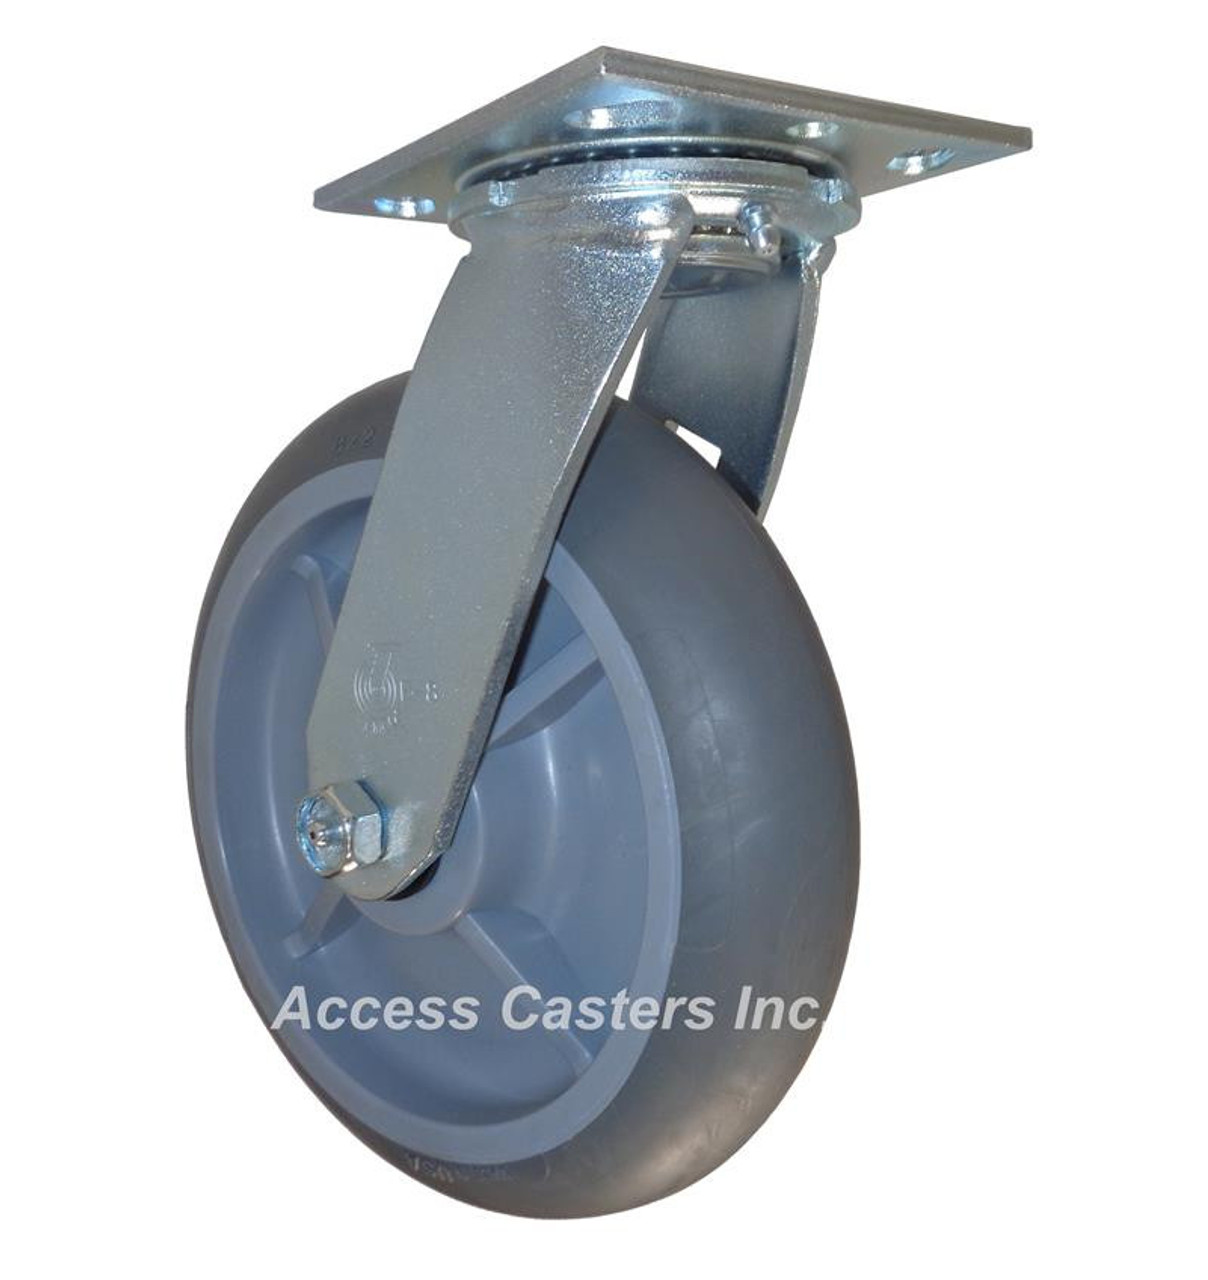 CAS82HT-S 8" x 2" Swivel Plate Caster, TPR Round Wheel for Lockwood